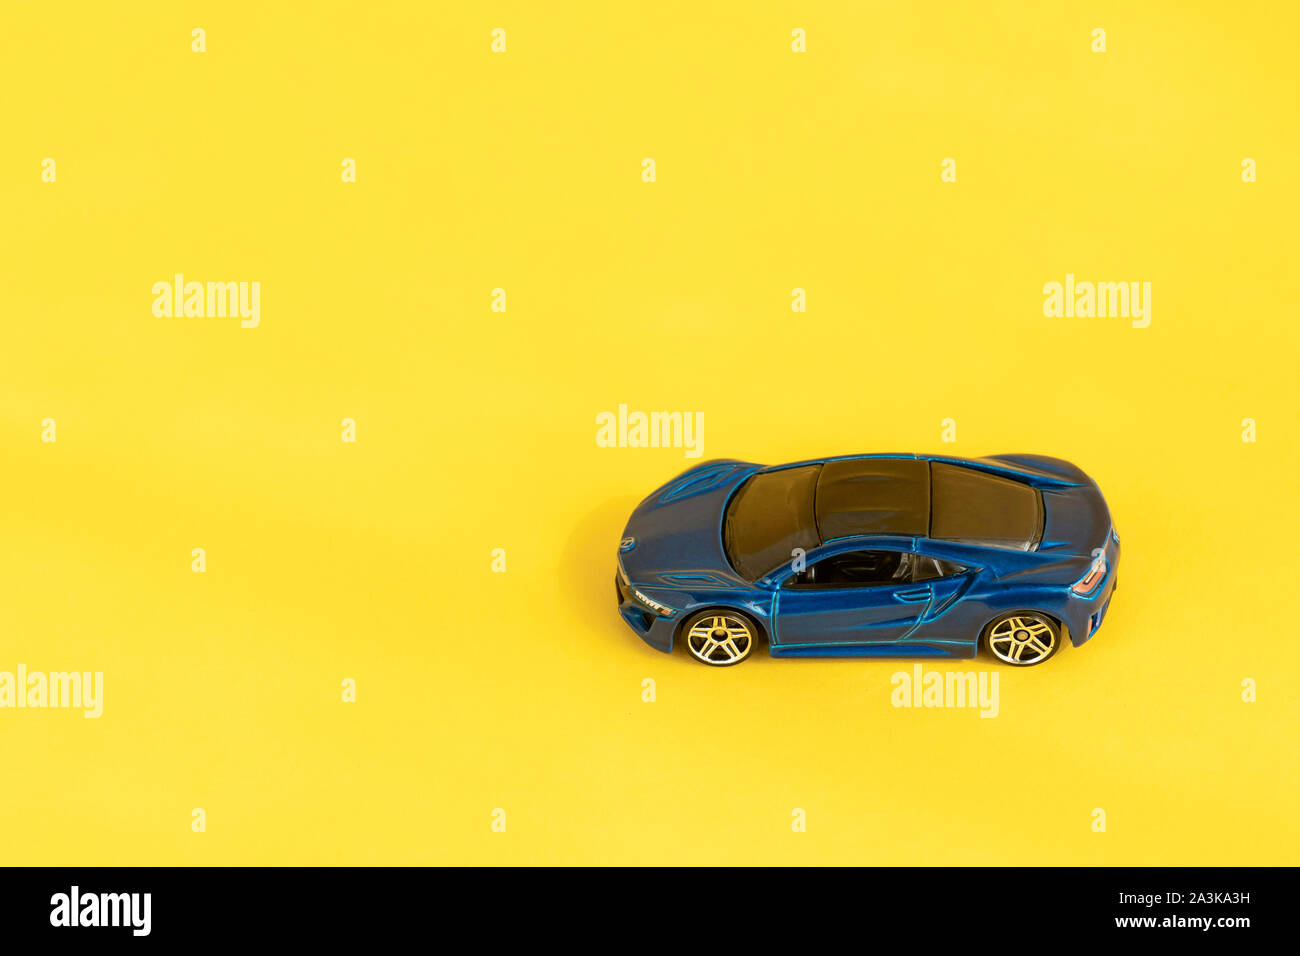 Moscow, Russia - 30 September, 2019. Blue kids toy car flat lay on colorful yellow background. Modern design. Minimal creative flatlay composition Stock Photo